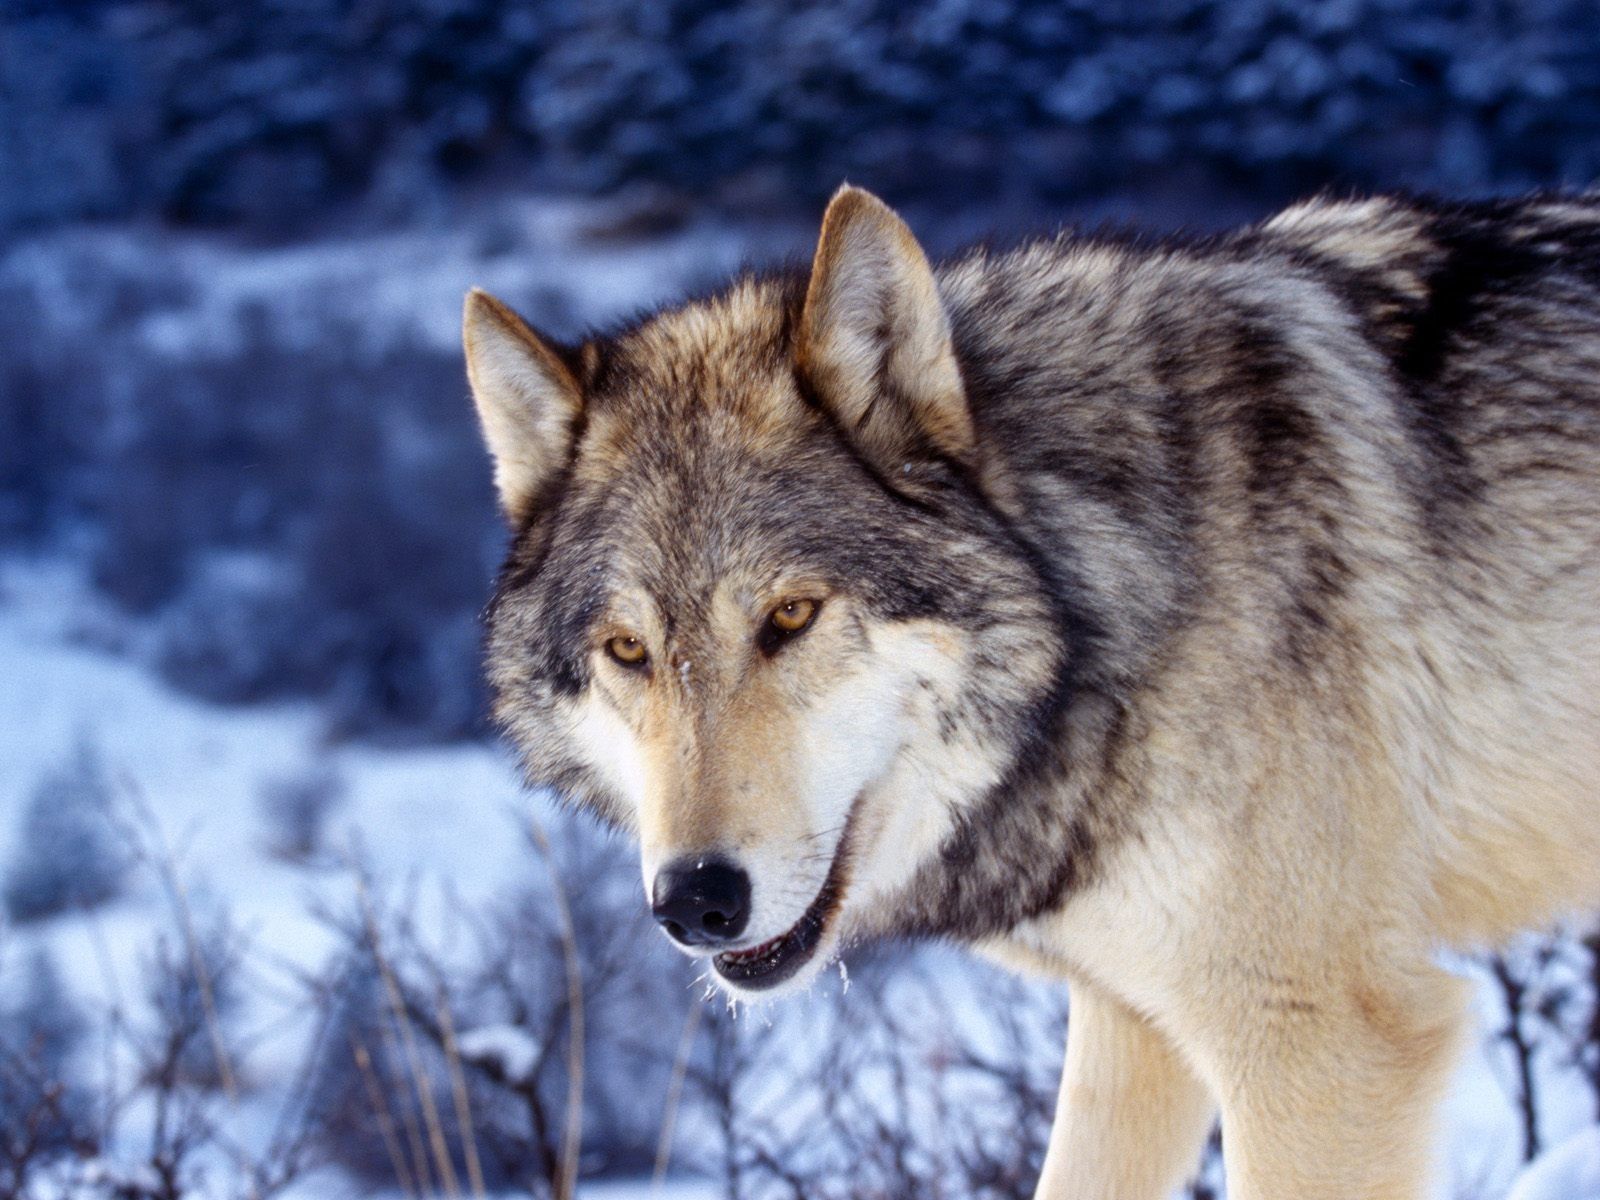 Gray Wolf in Snow Wallpaper Wolves Animals Wallpaper in jpg format for free download